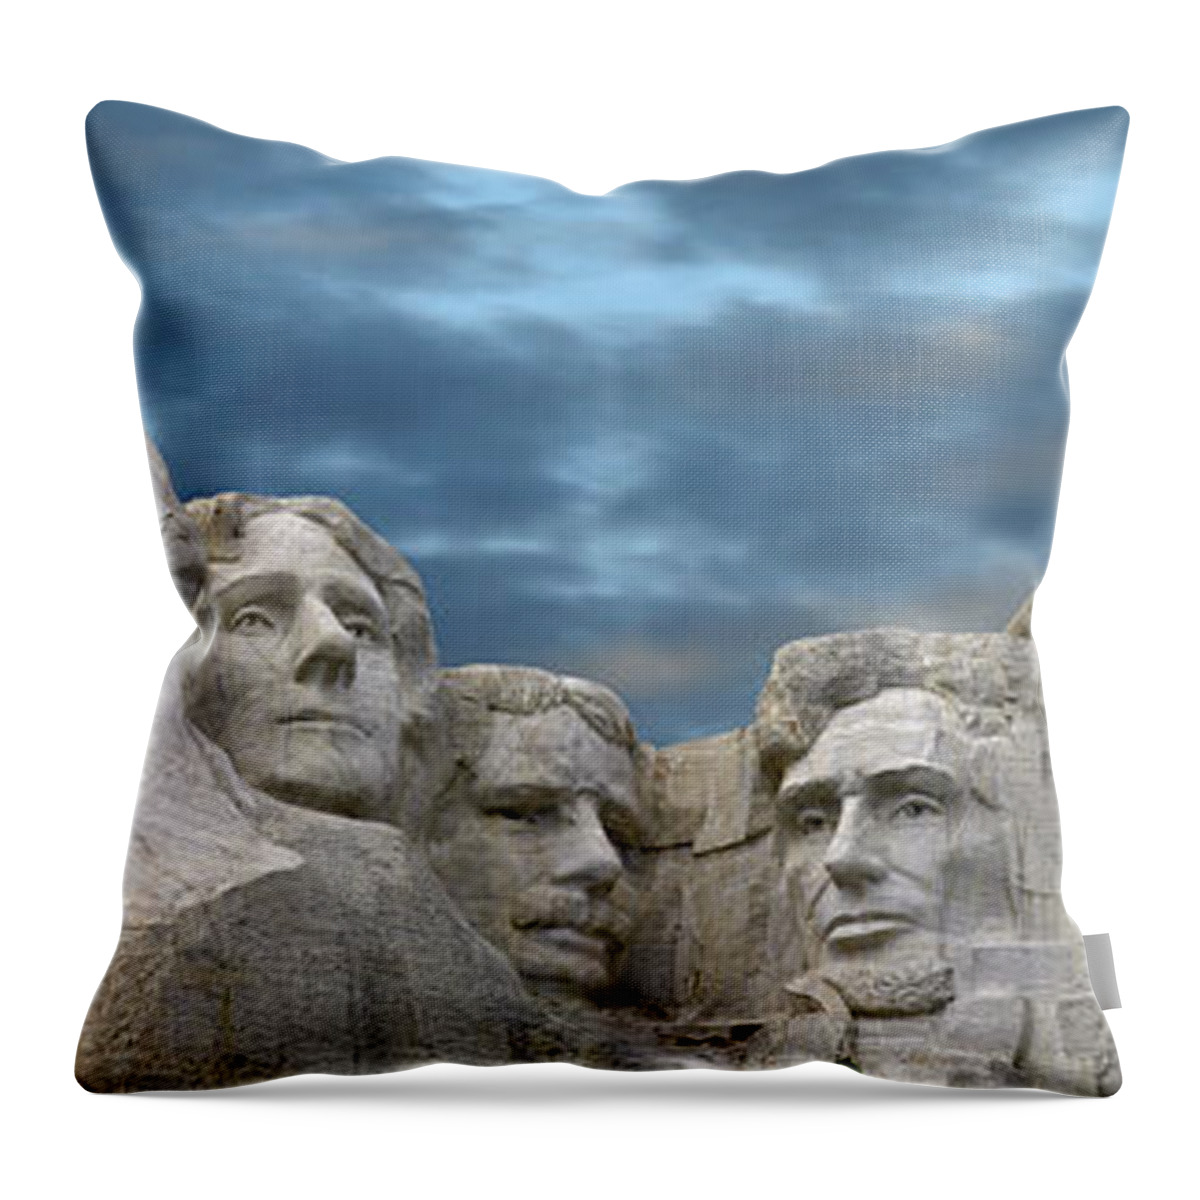 00176018 Throw Pillow featuring the photograph Mount Rushmore South Dakota by Tim Fitzharris